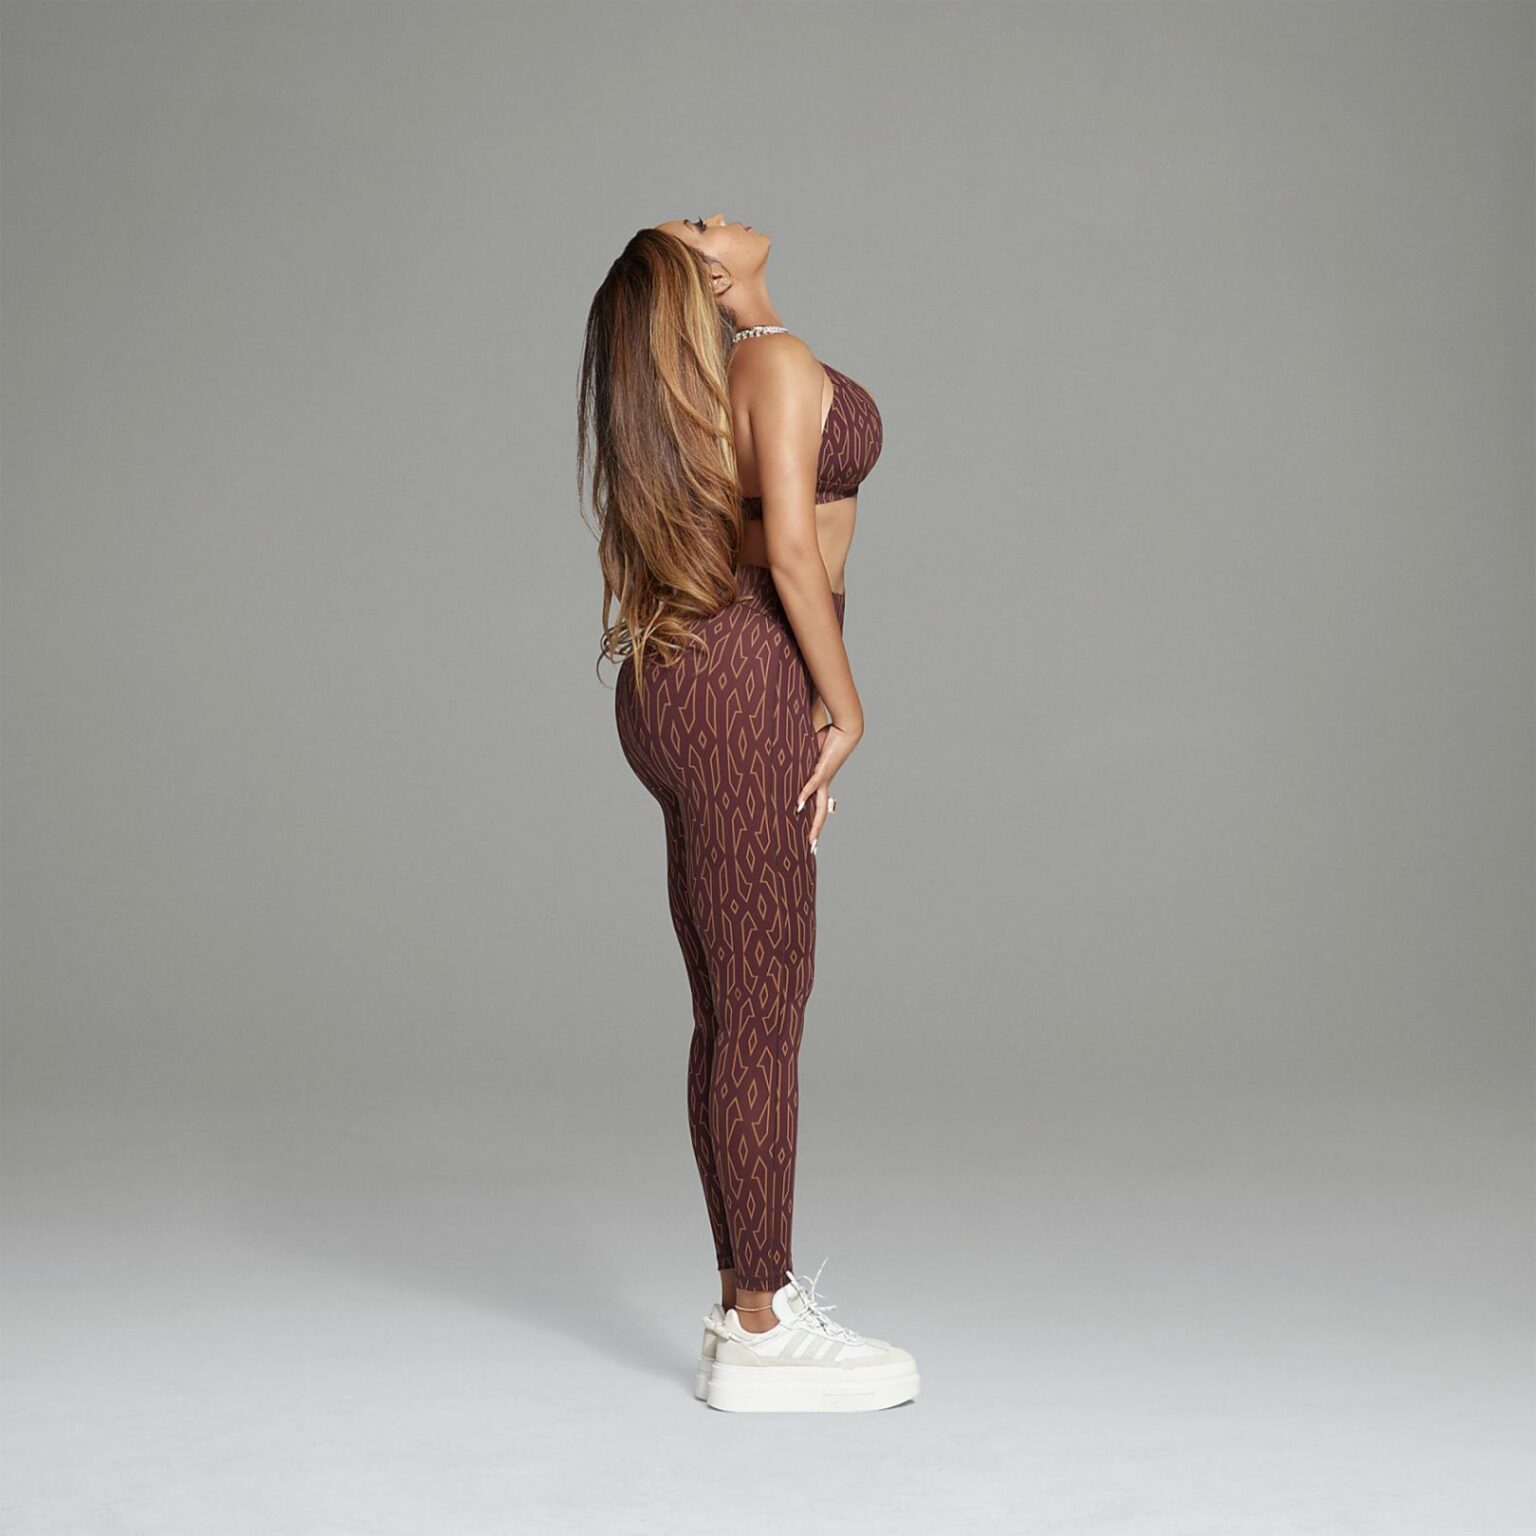 Beyonce Flaunts Her Curves In The Latest Ivy Park X Adidas Collection Flavourmag